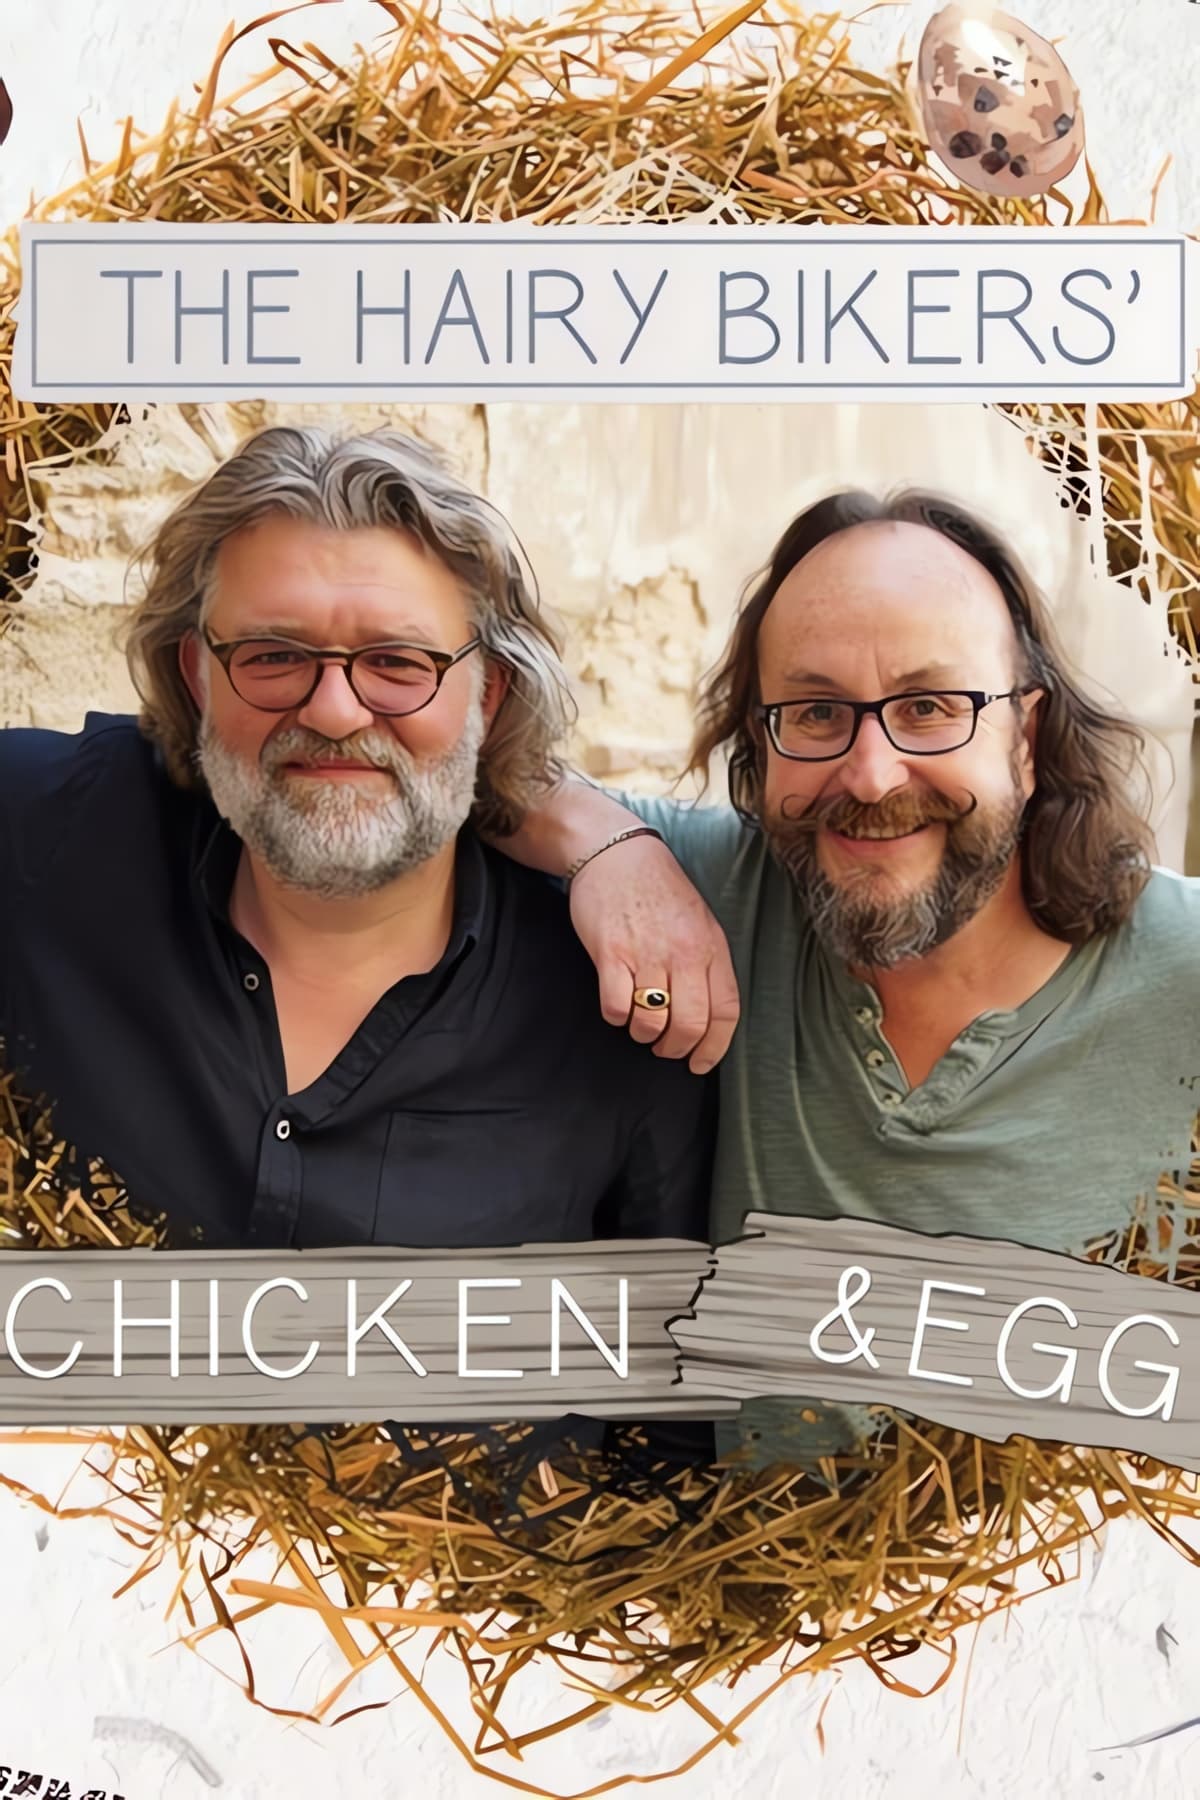 The Hairy Bikers: Chicken & Egg